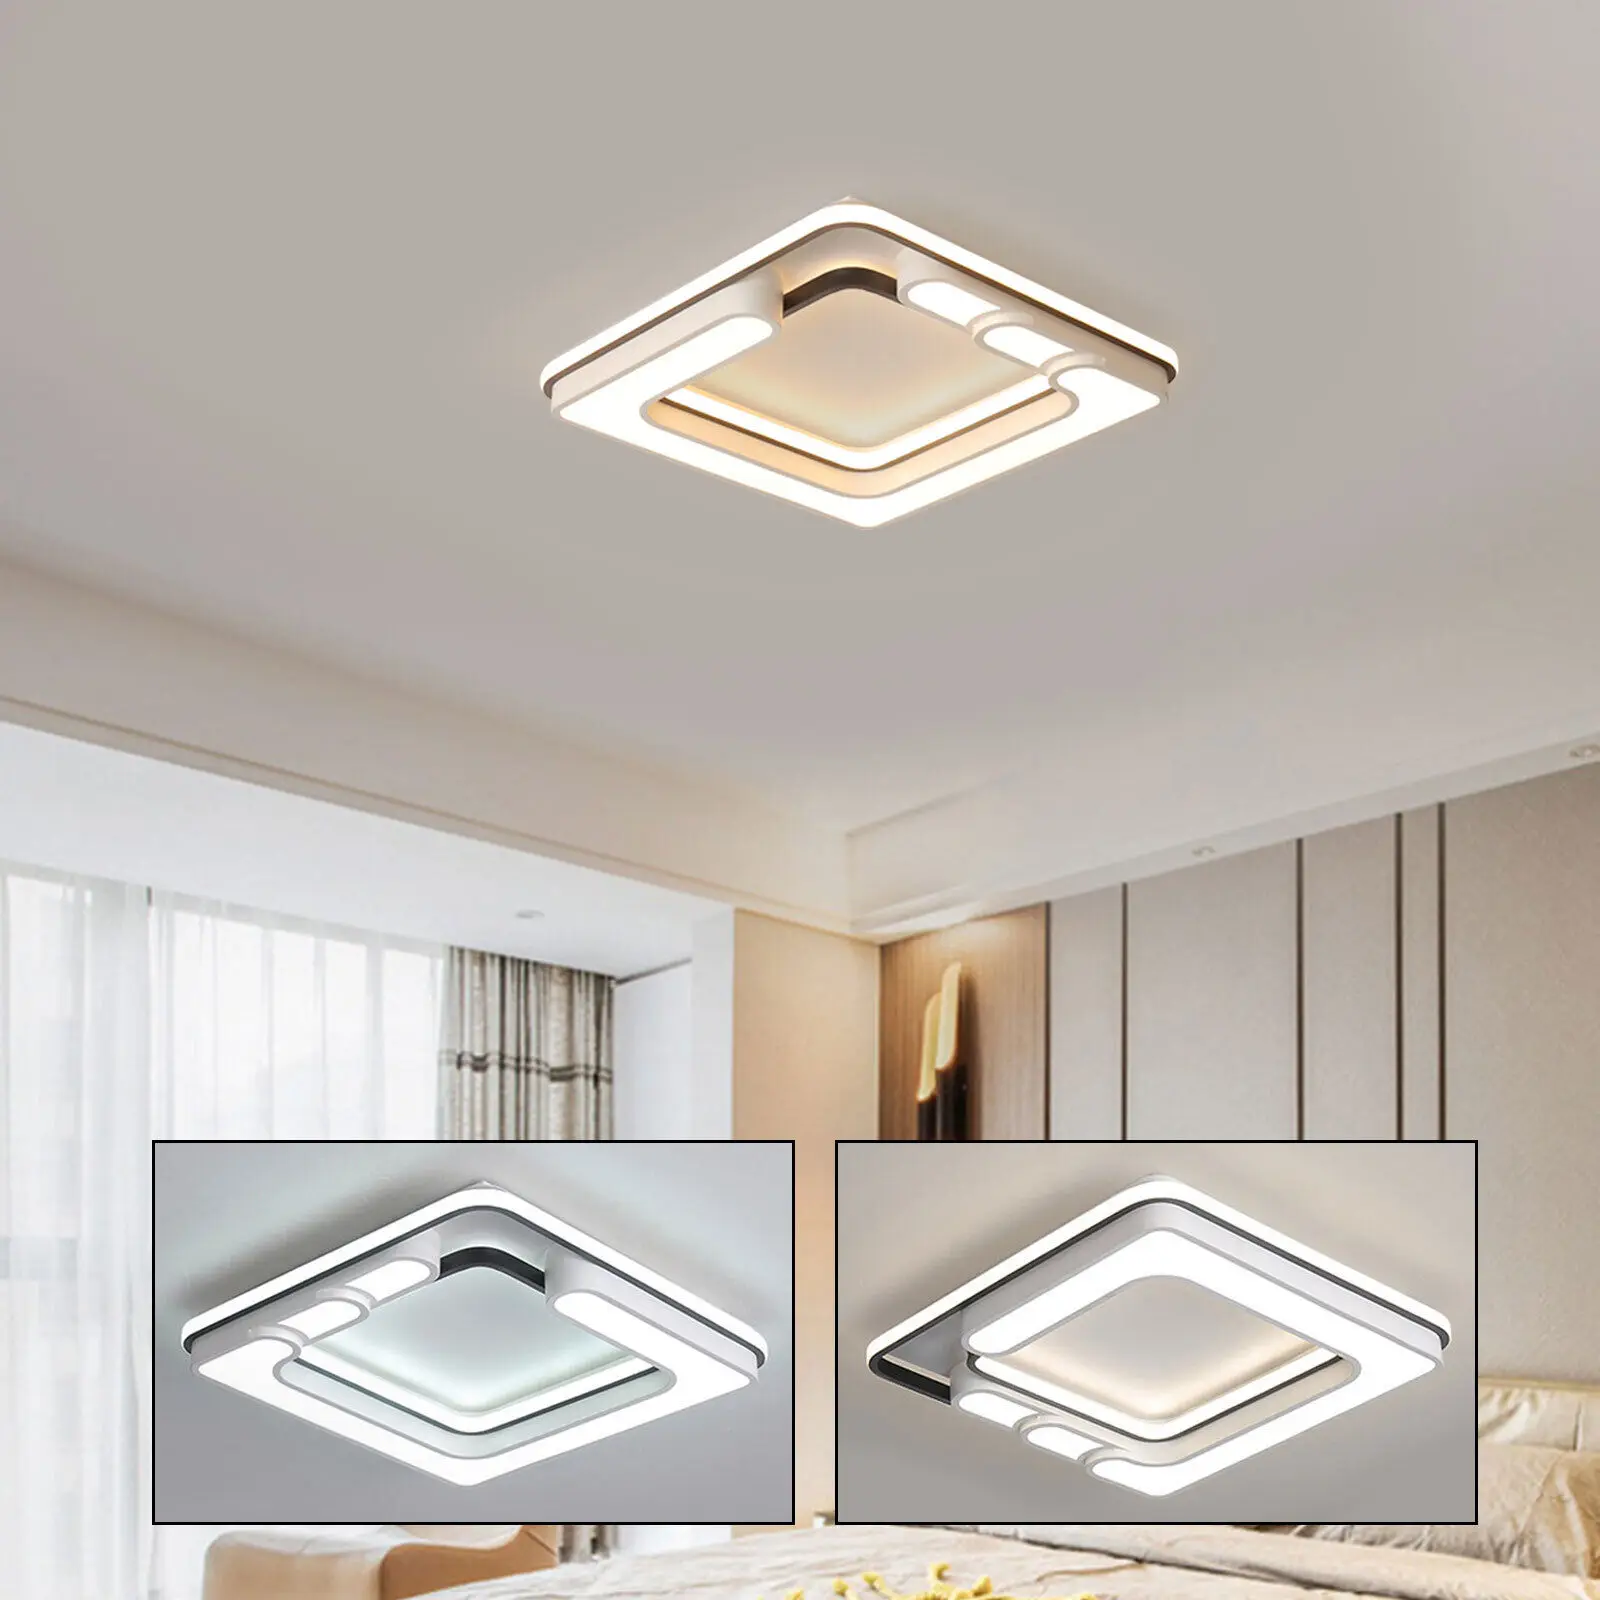 

LED Ceiling Light 32W 110V Modern Chandelier Flush Mount Pendant Lamp Dimmable With Remote Control